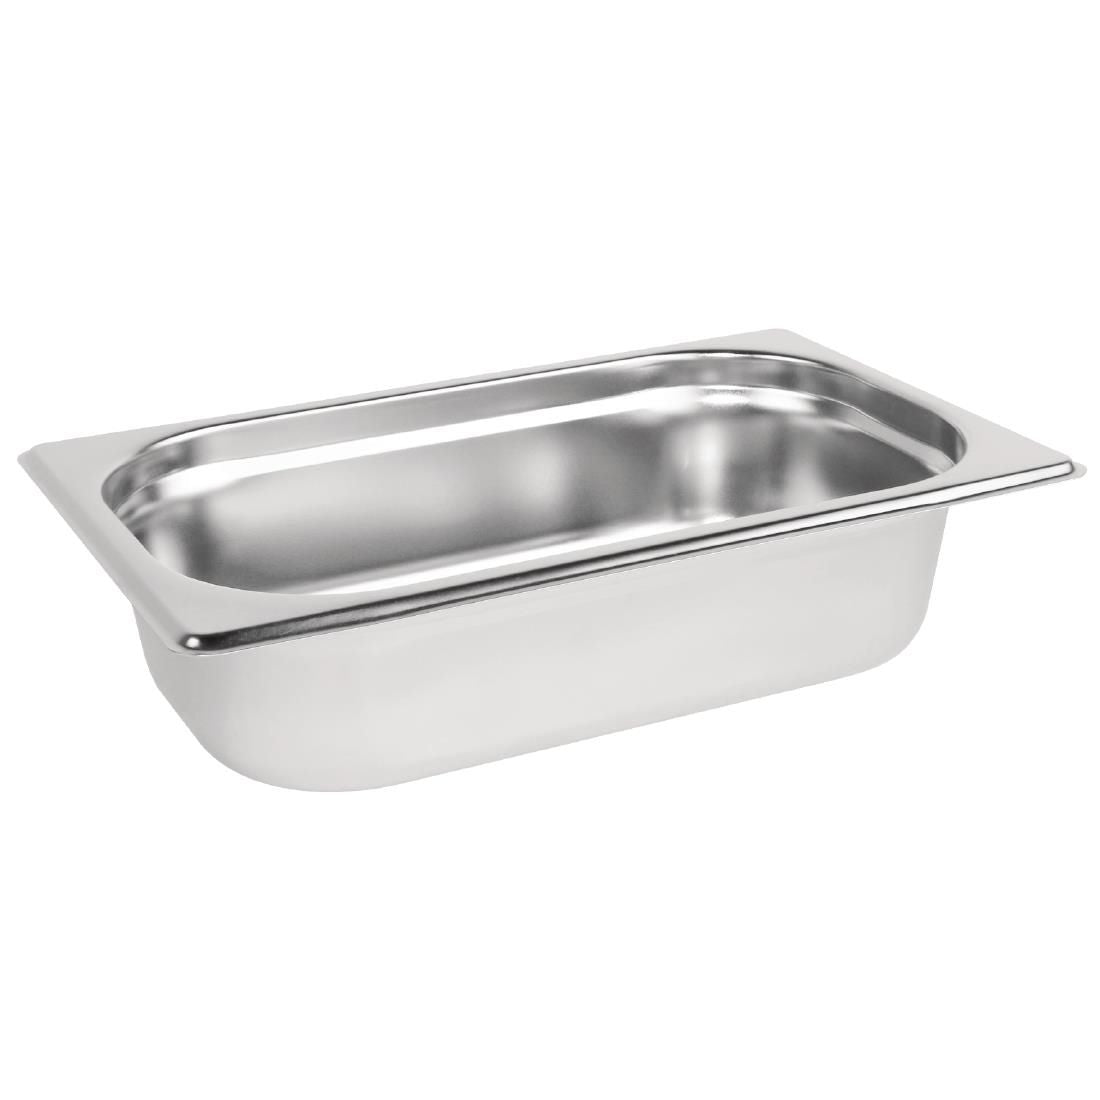 K818 Vogue Stainless Steel 1/4 Gastronorm Pan 65mm